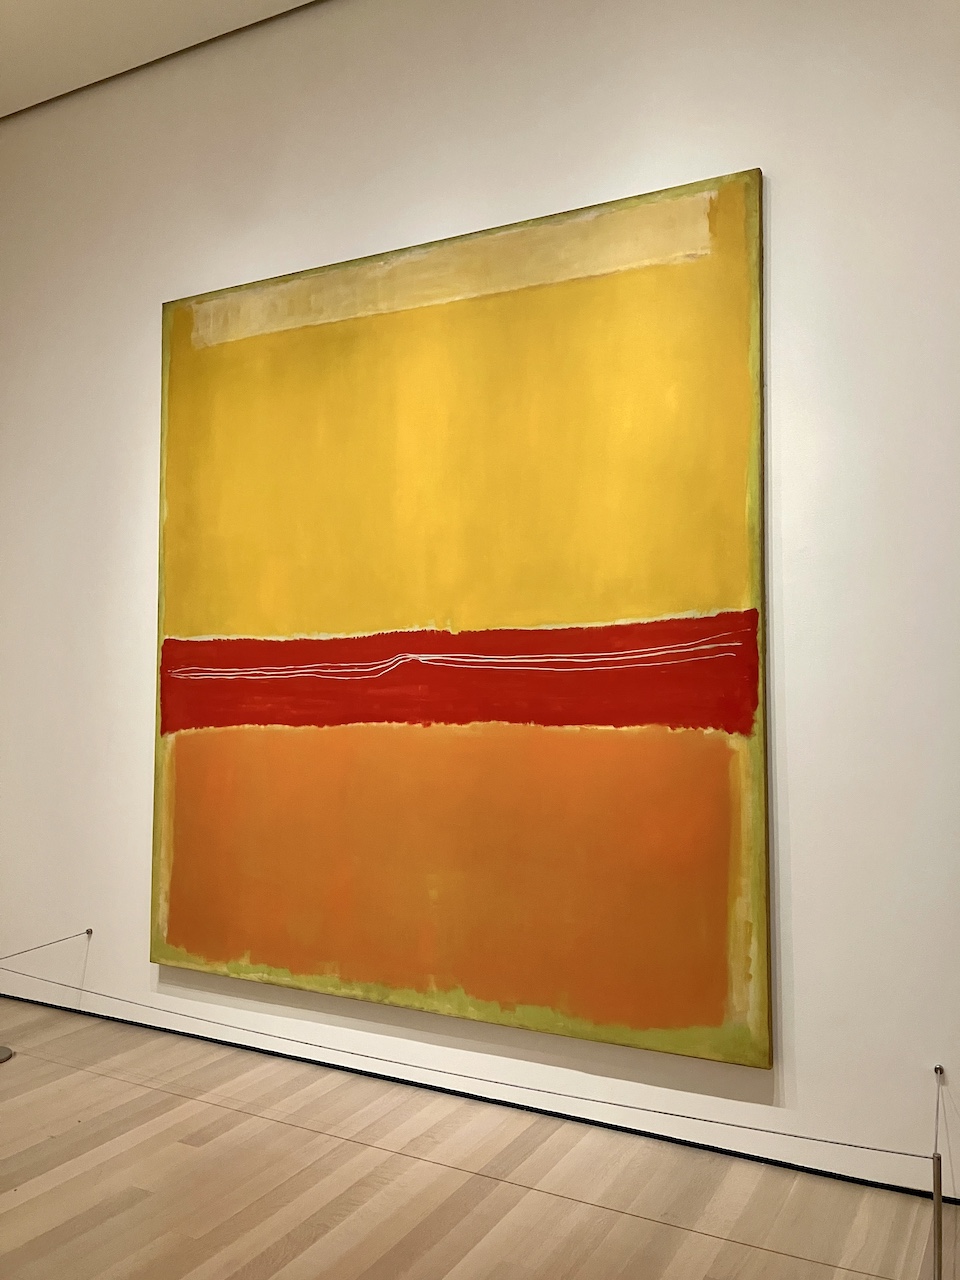 A large original Mark Rothko colour field painting at the Museum of Modern Art, New York City | MoMA